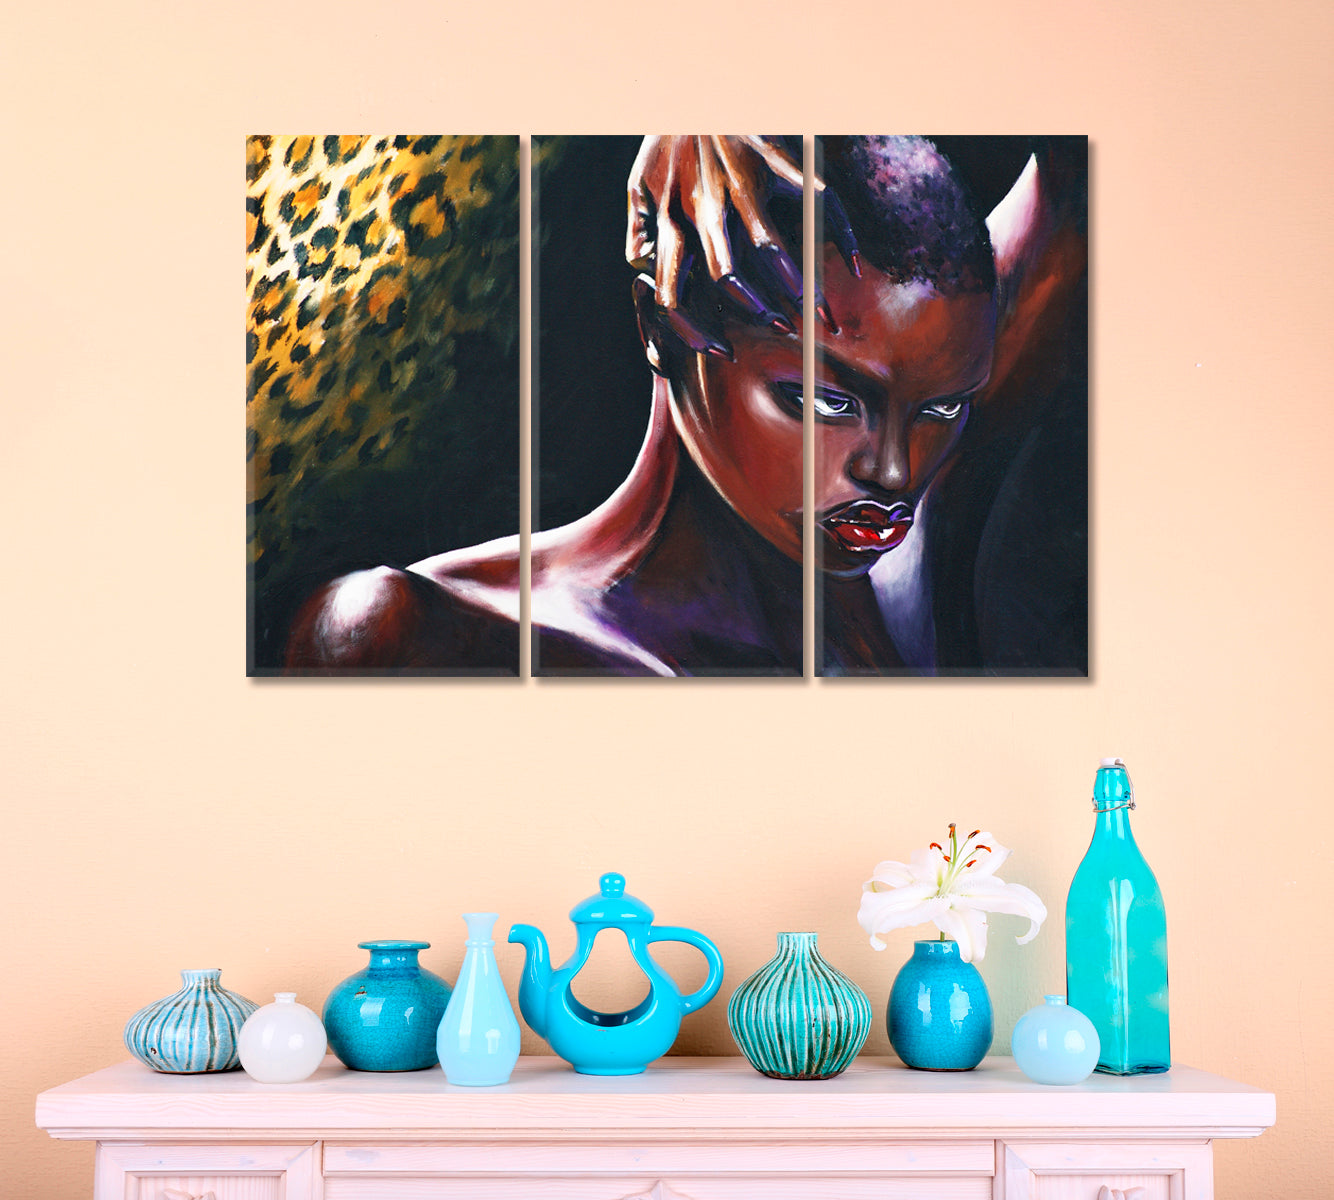 BEAUTY OF BLACK Stunning Beautiful African Woman Contemporary African Style Canvas Print Artesty 3 panels 36" x 24" 